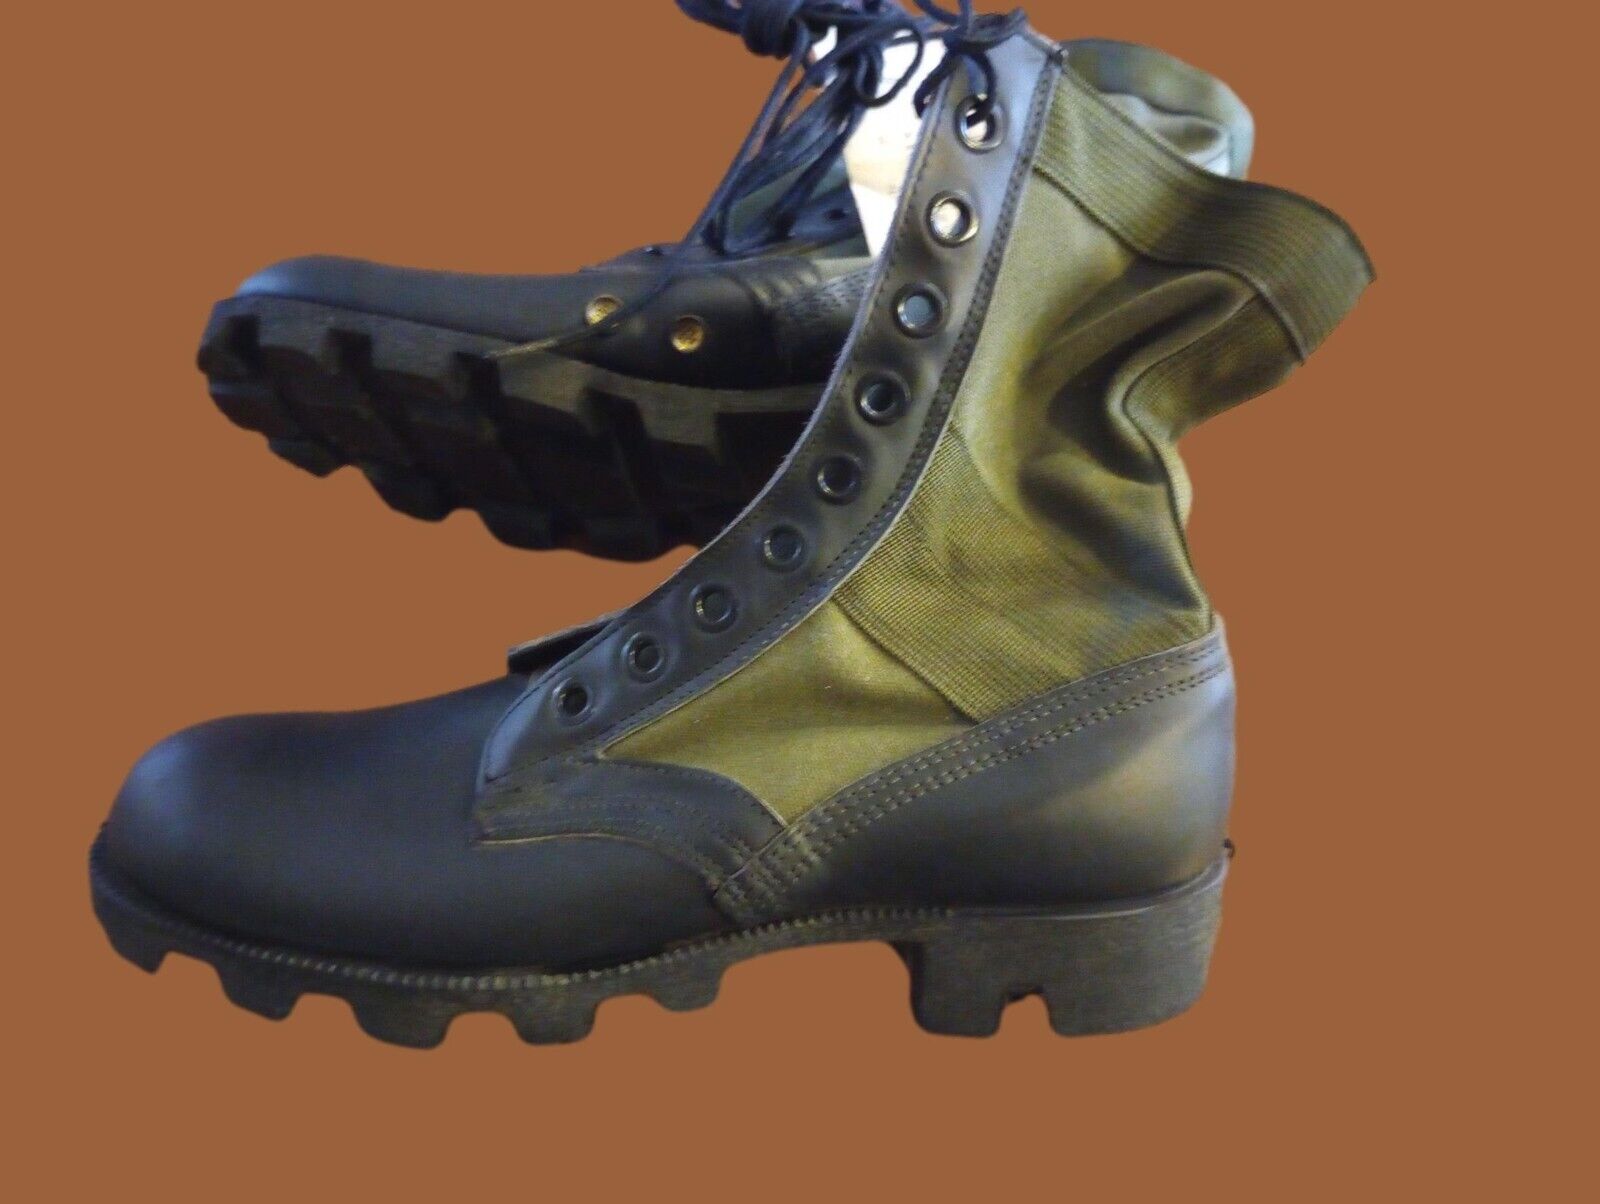 U.S MILITARY ISSUE JUNGLE BOOTS PANAMA SOLE RO SEARCH SPIKE PROTECTIVE 7R NEW